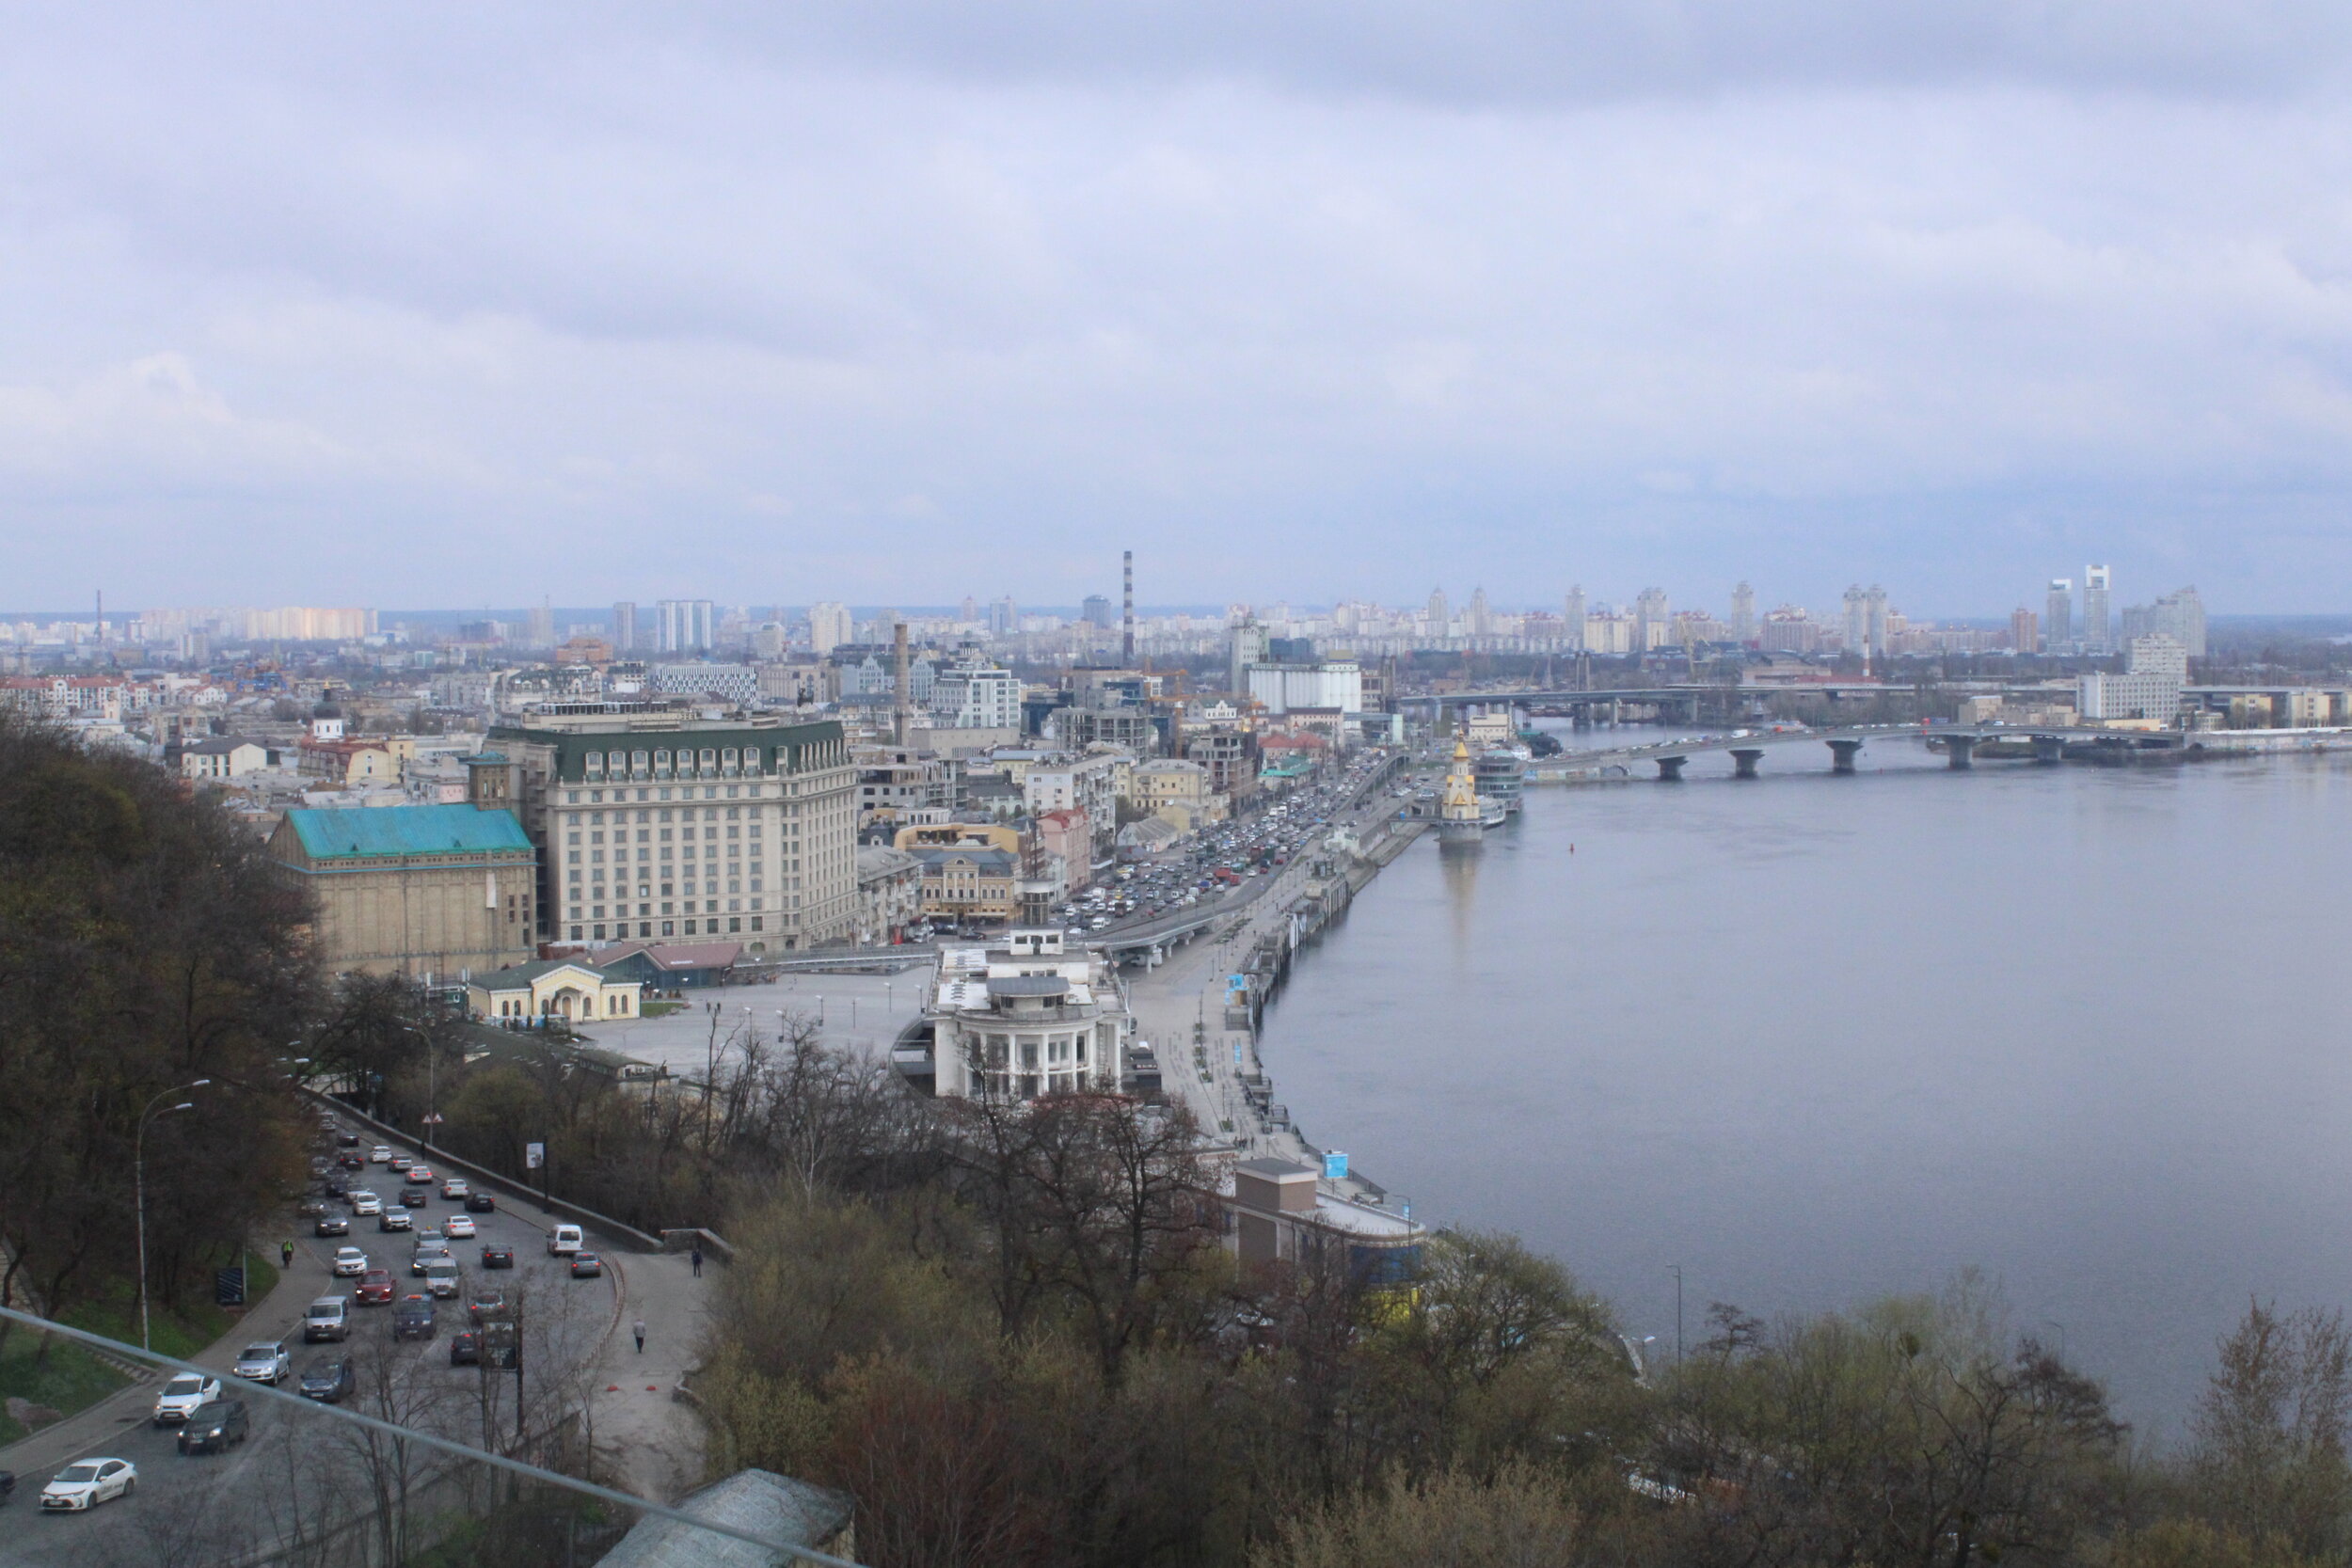 KYIV, Ukraine. April 19th, 2021. PICTURED: An overview of riverfront Kyiv, the oldest part of the city.